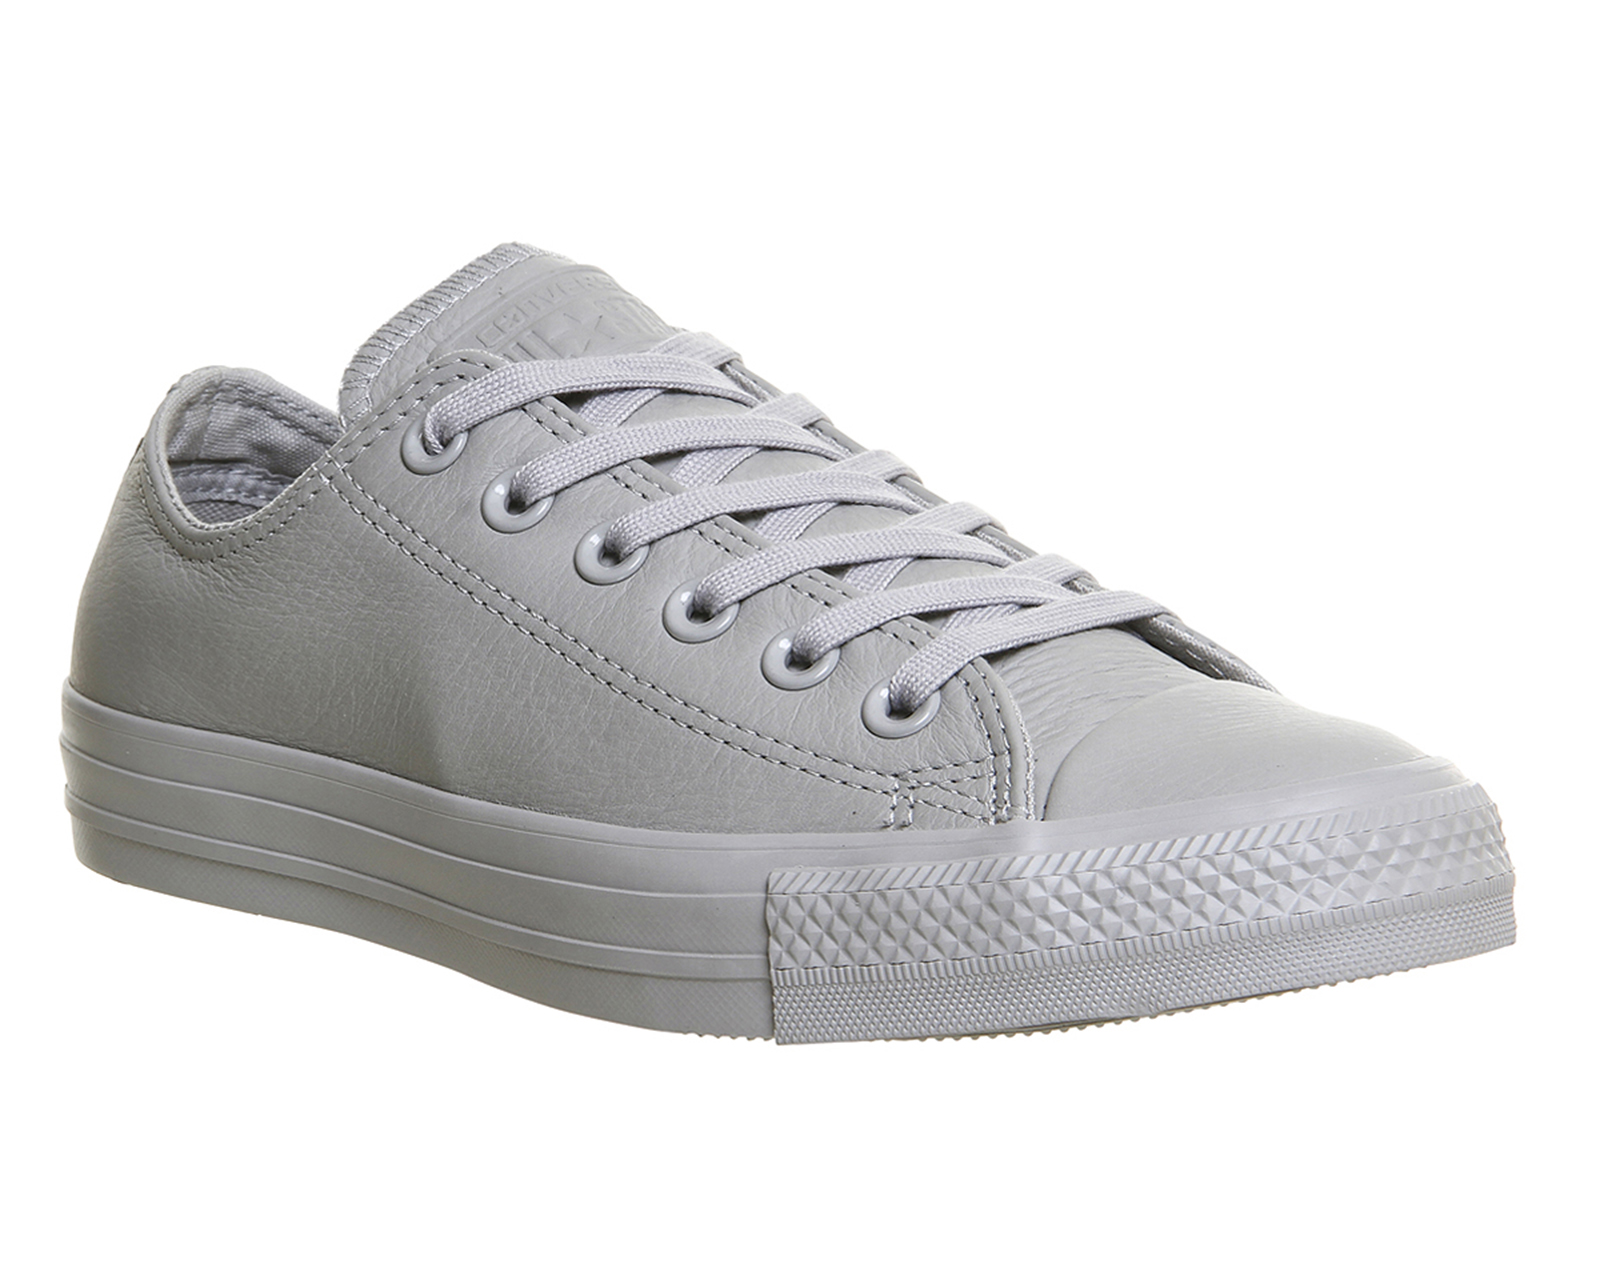 grey leather trainers womens